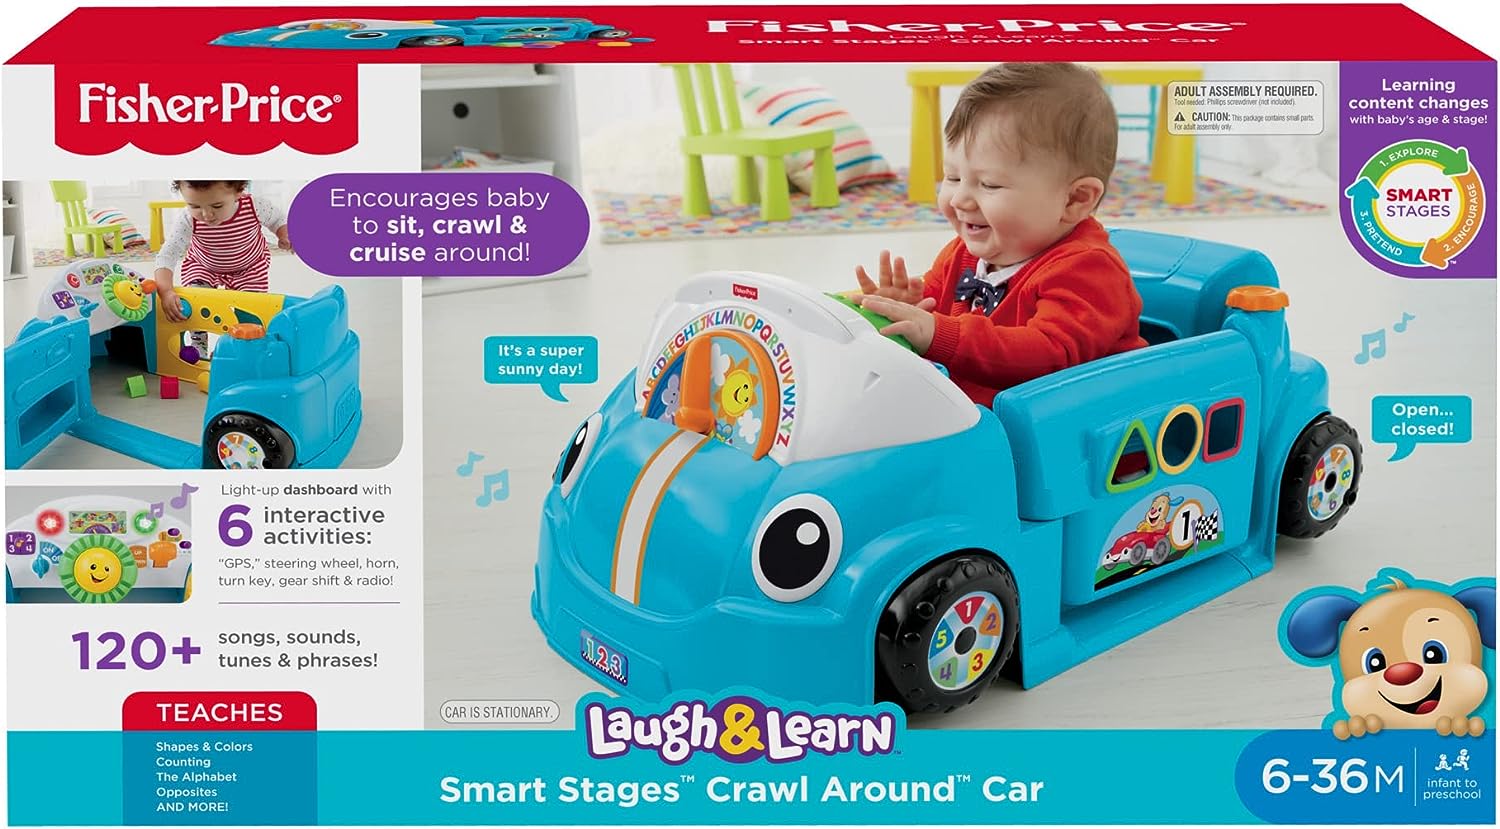 Fisher-Price Laugh & Learn Baby Activity Center, Crawl Around Car, Interactive Playset with Smart Stages for Infants & Toddlers, Blue